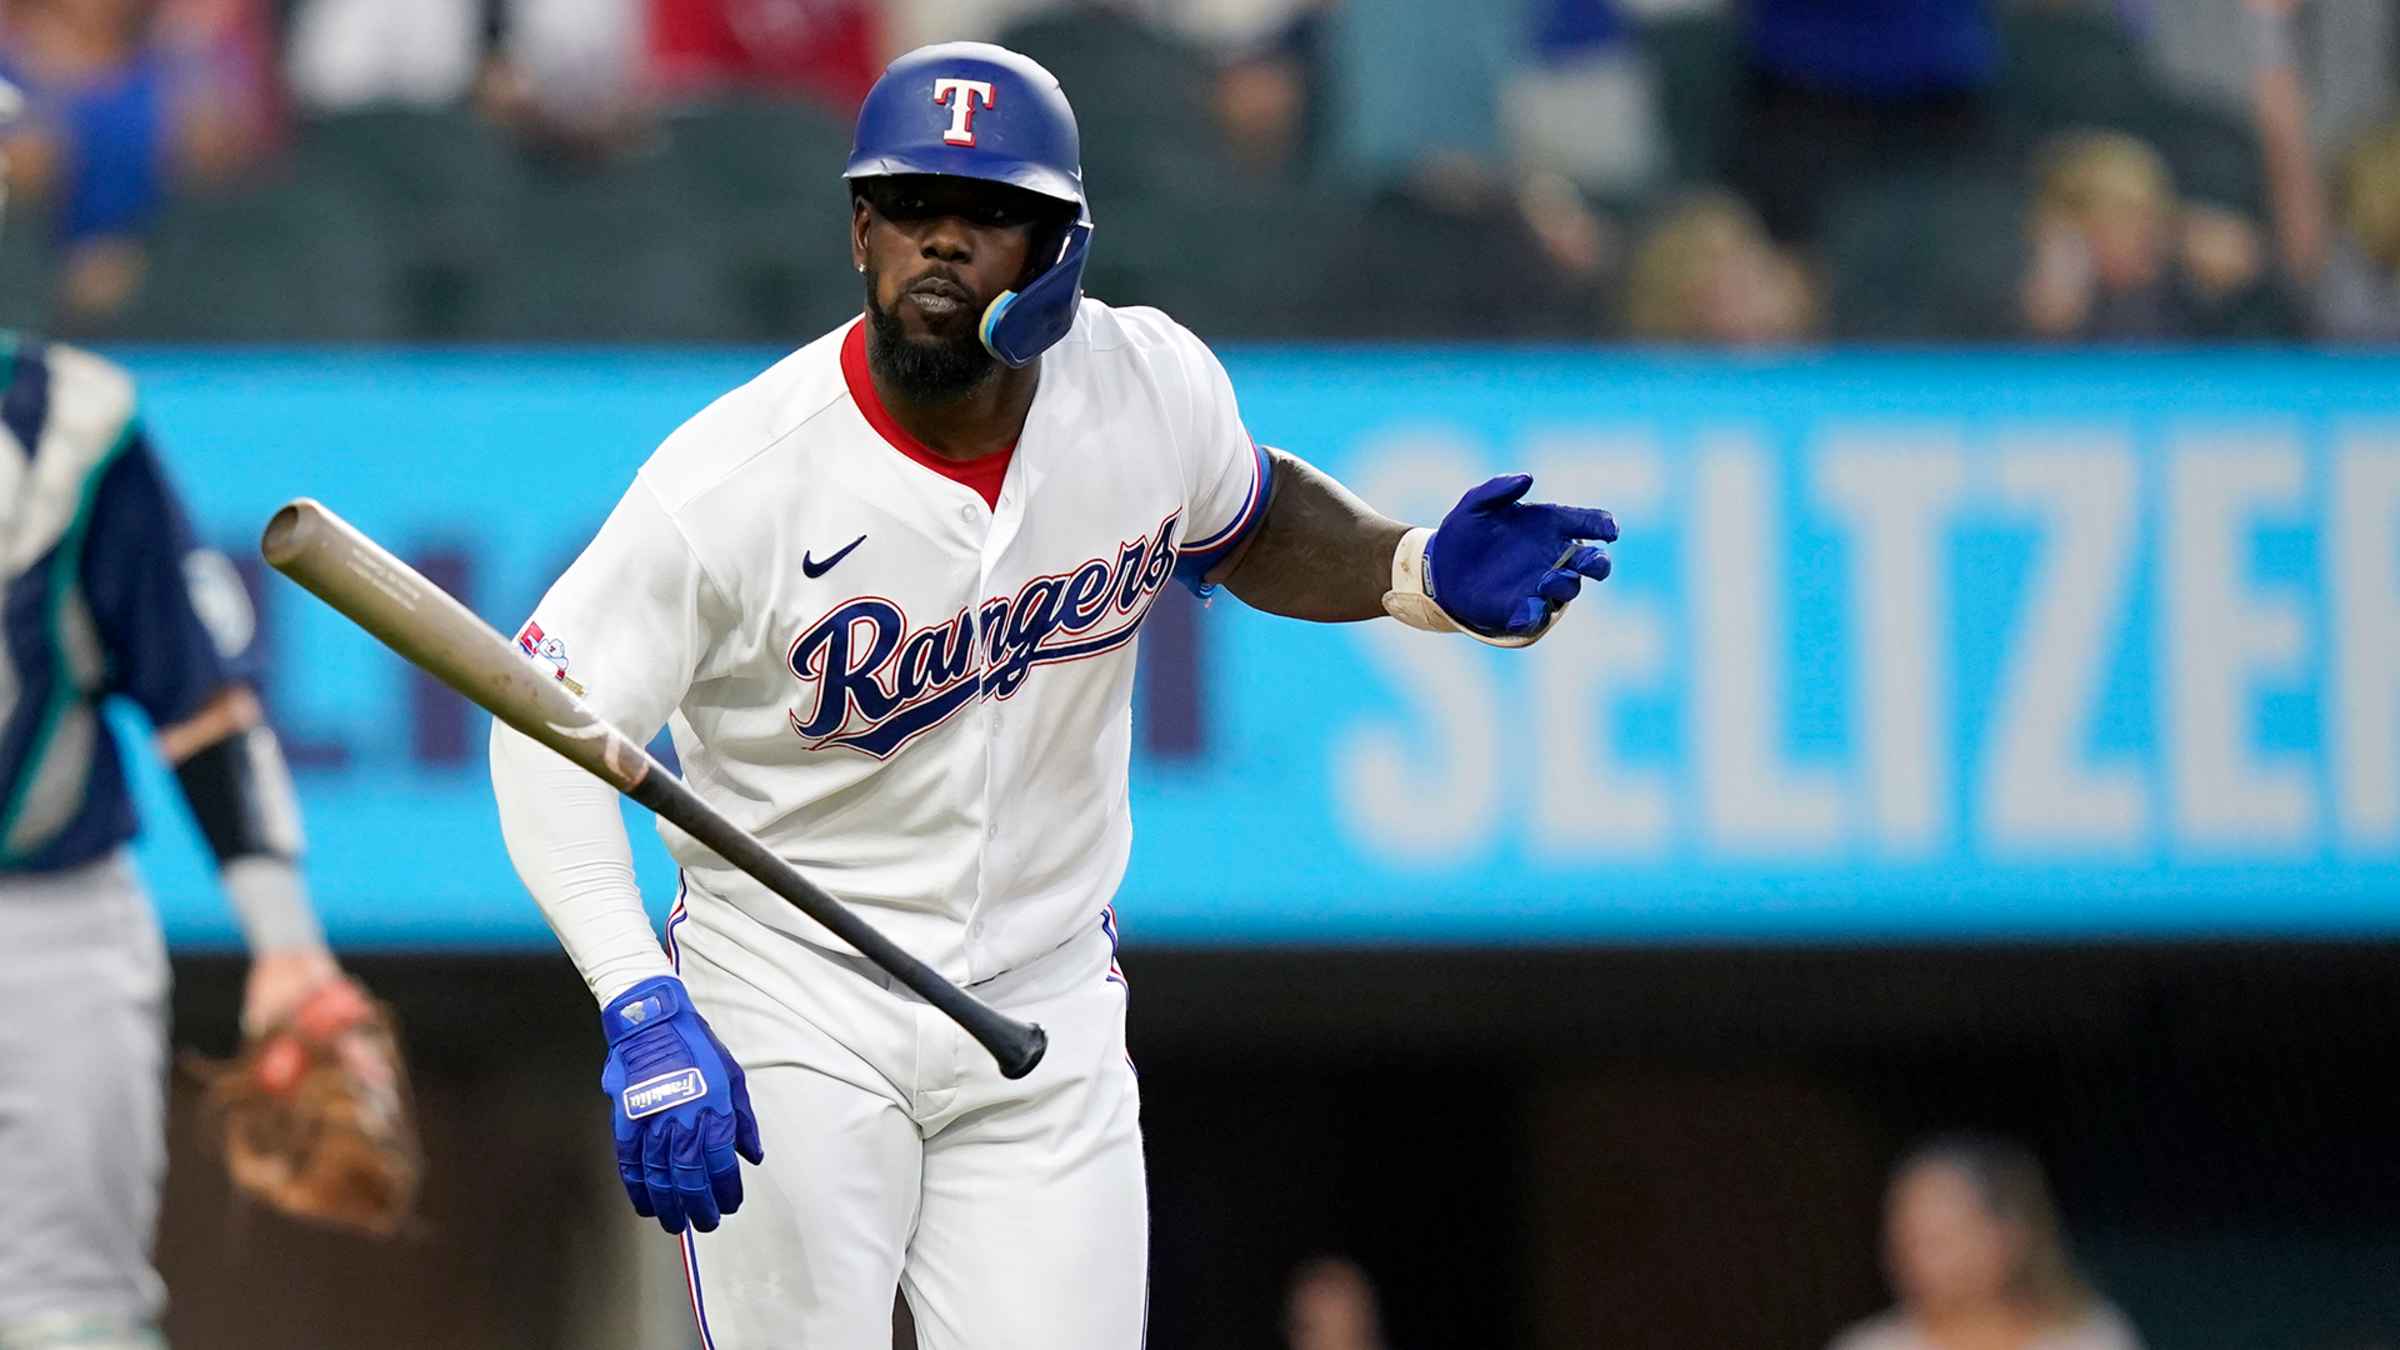 MLB roundup: Adolis Garcia's 3 HRs, 8 RBIs lead Rangers' rout